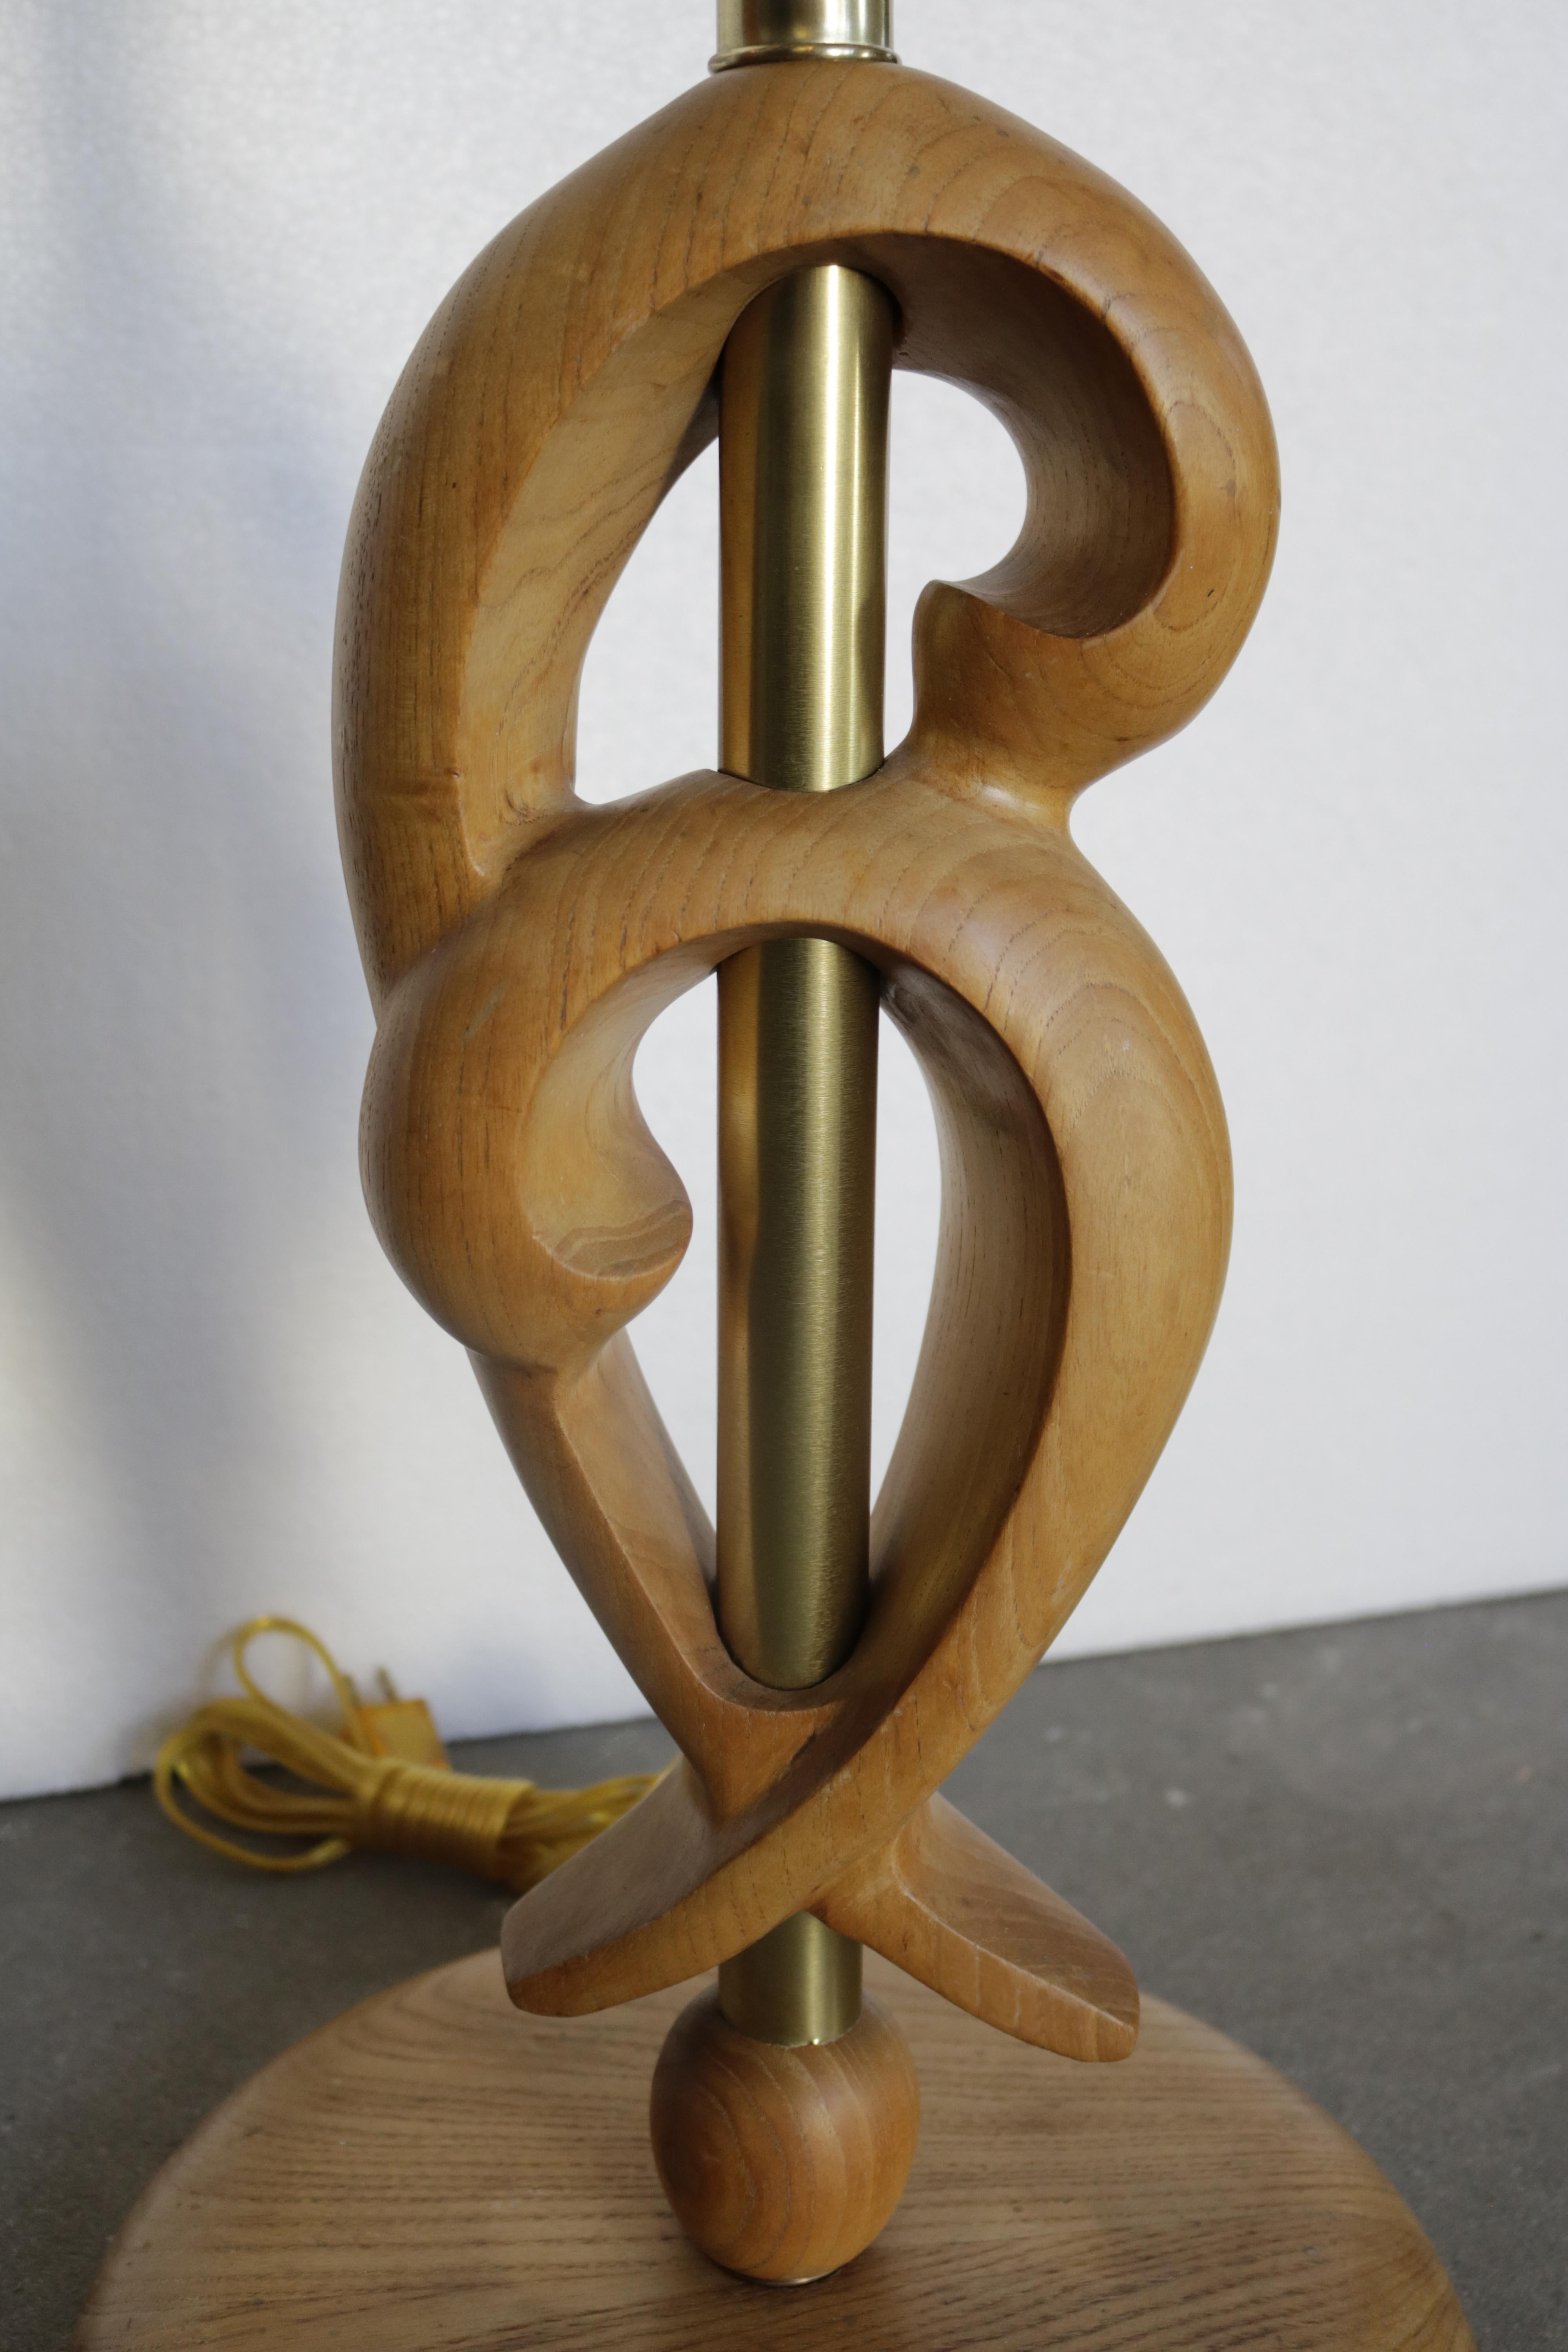 Floor lamp by mid-century designer Russel Wright. The brass stand is wrapped in an oak sculpture in the shape of waves. The base is also oak. The silk shade is a rich brown, almost chocolate color (H13